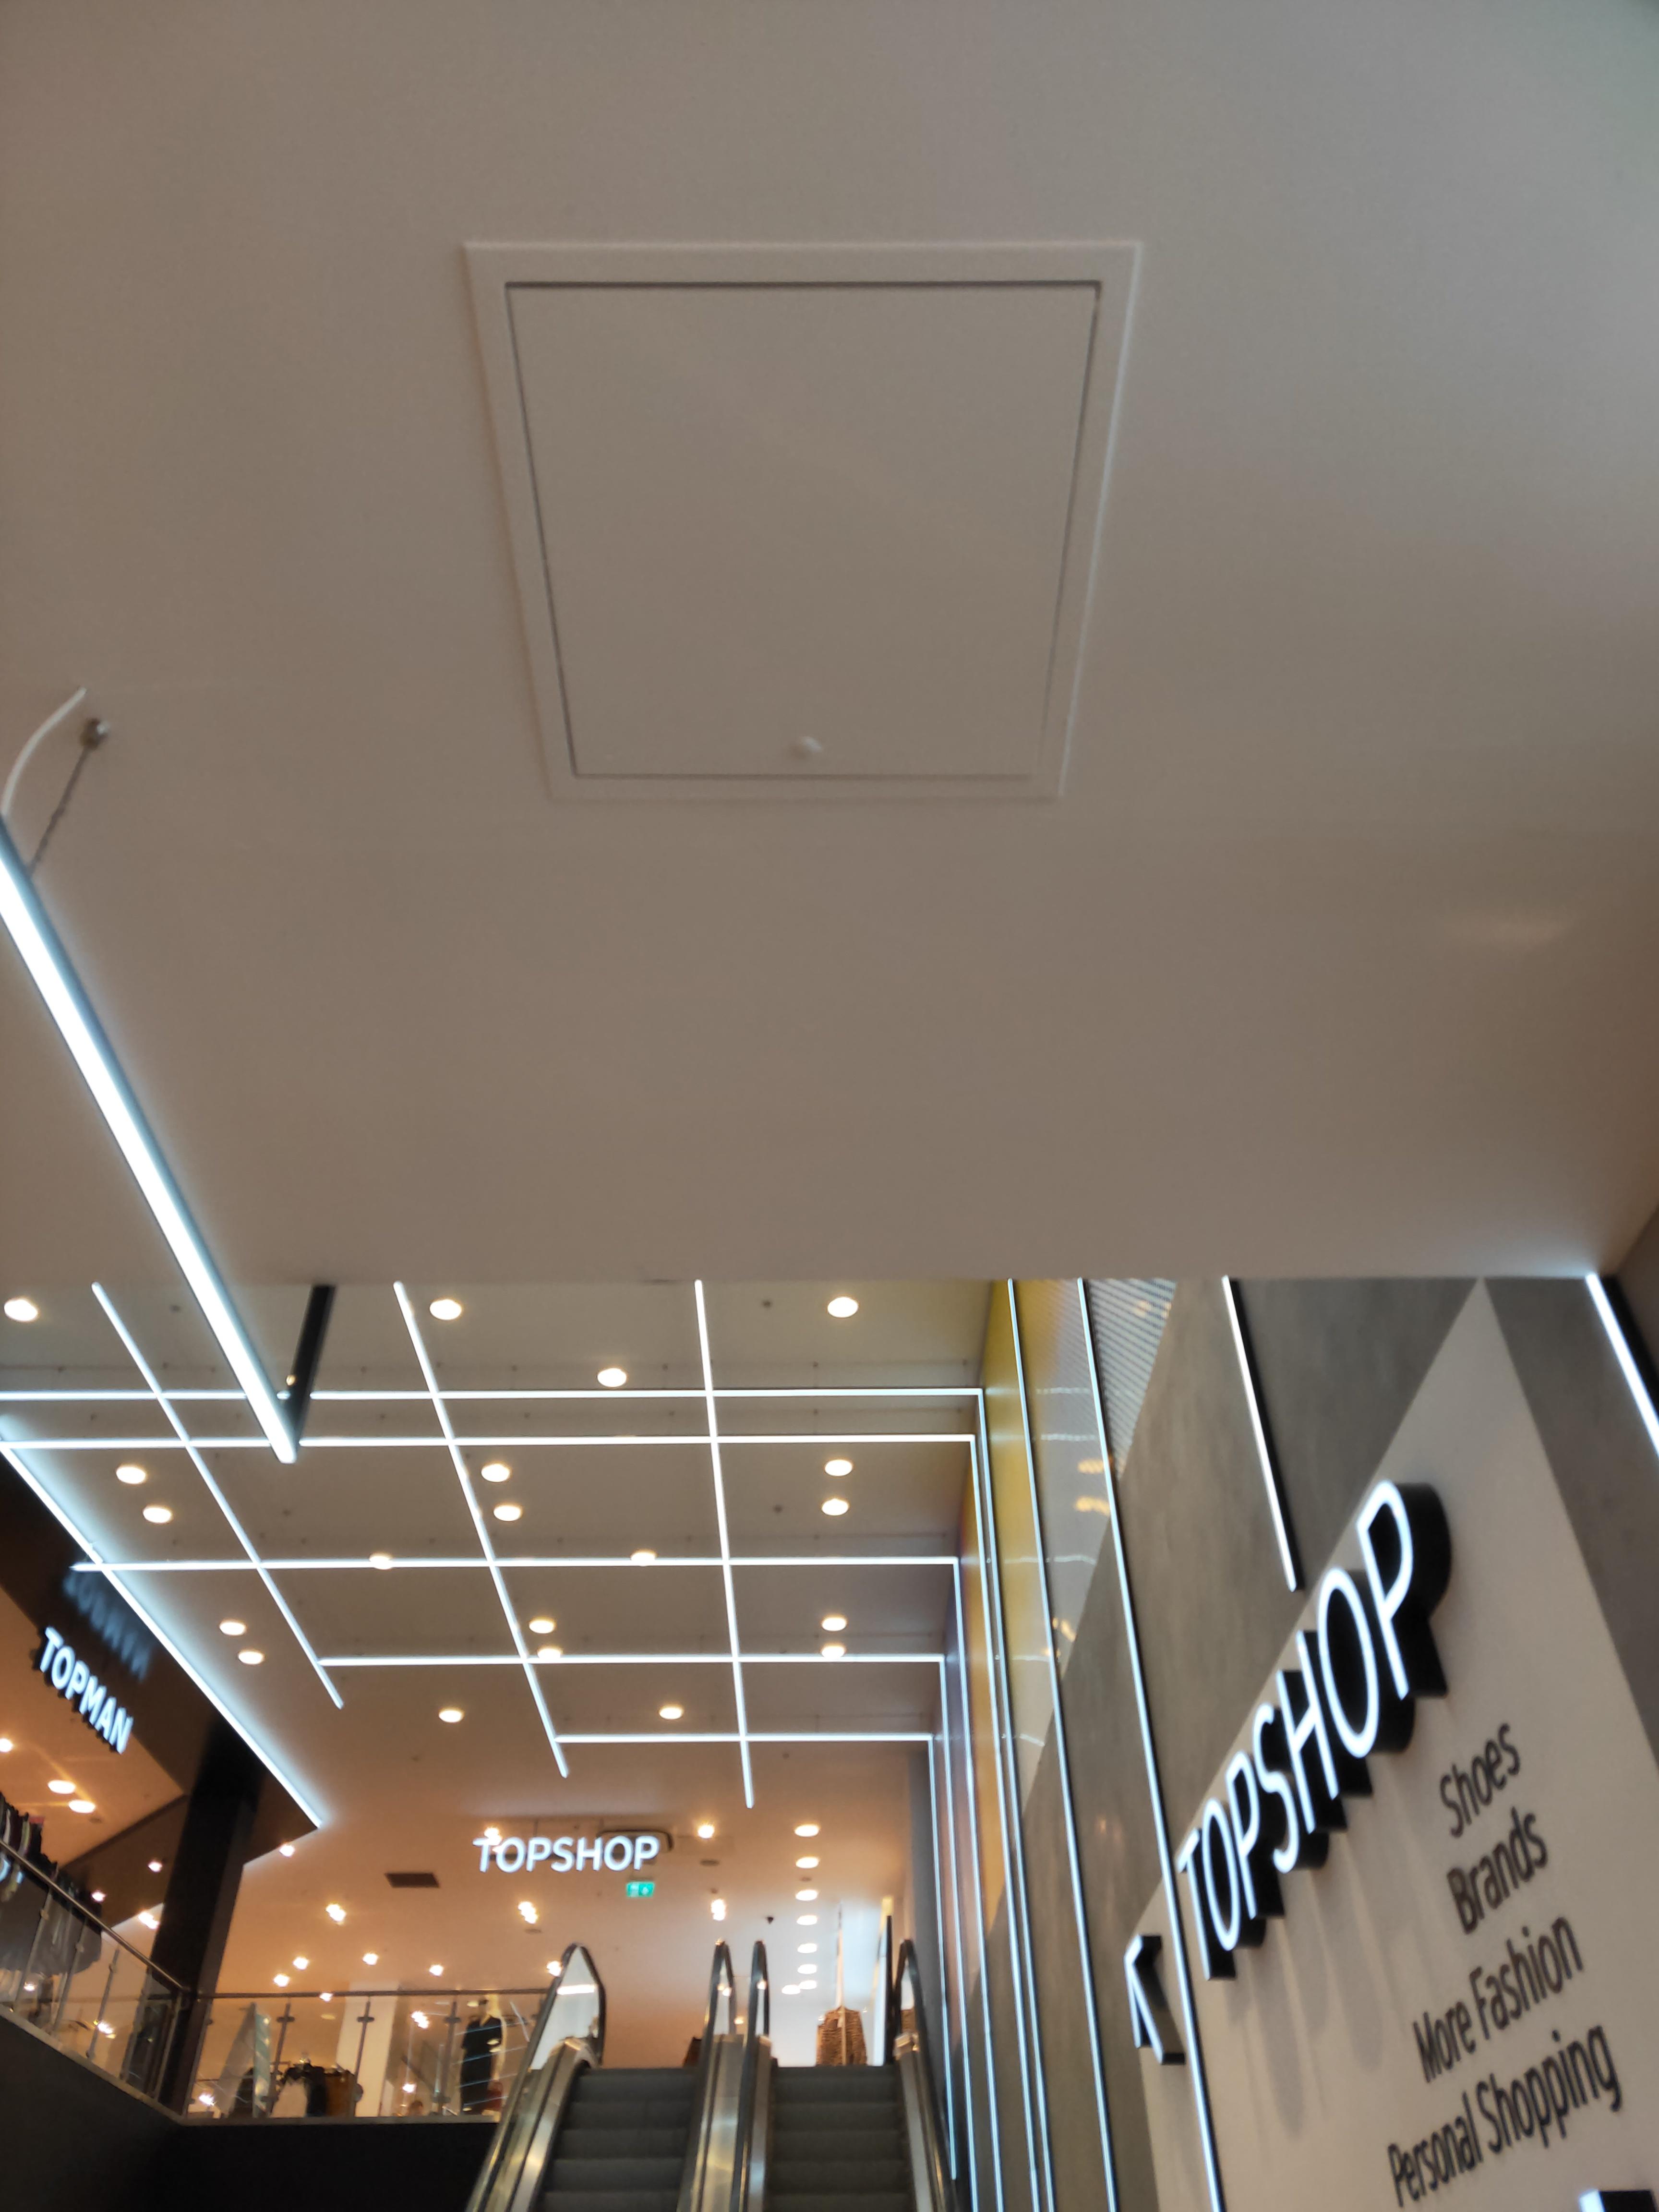 Where is the installation of the ceiling access panel?